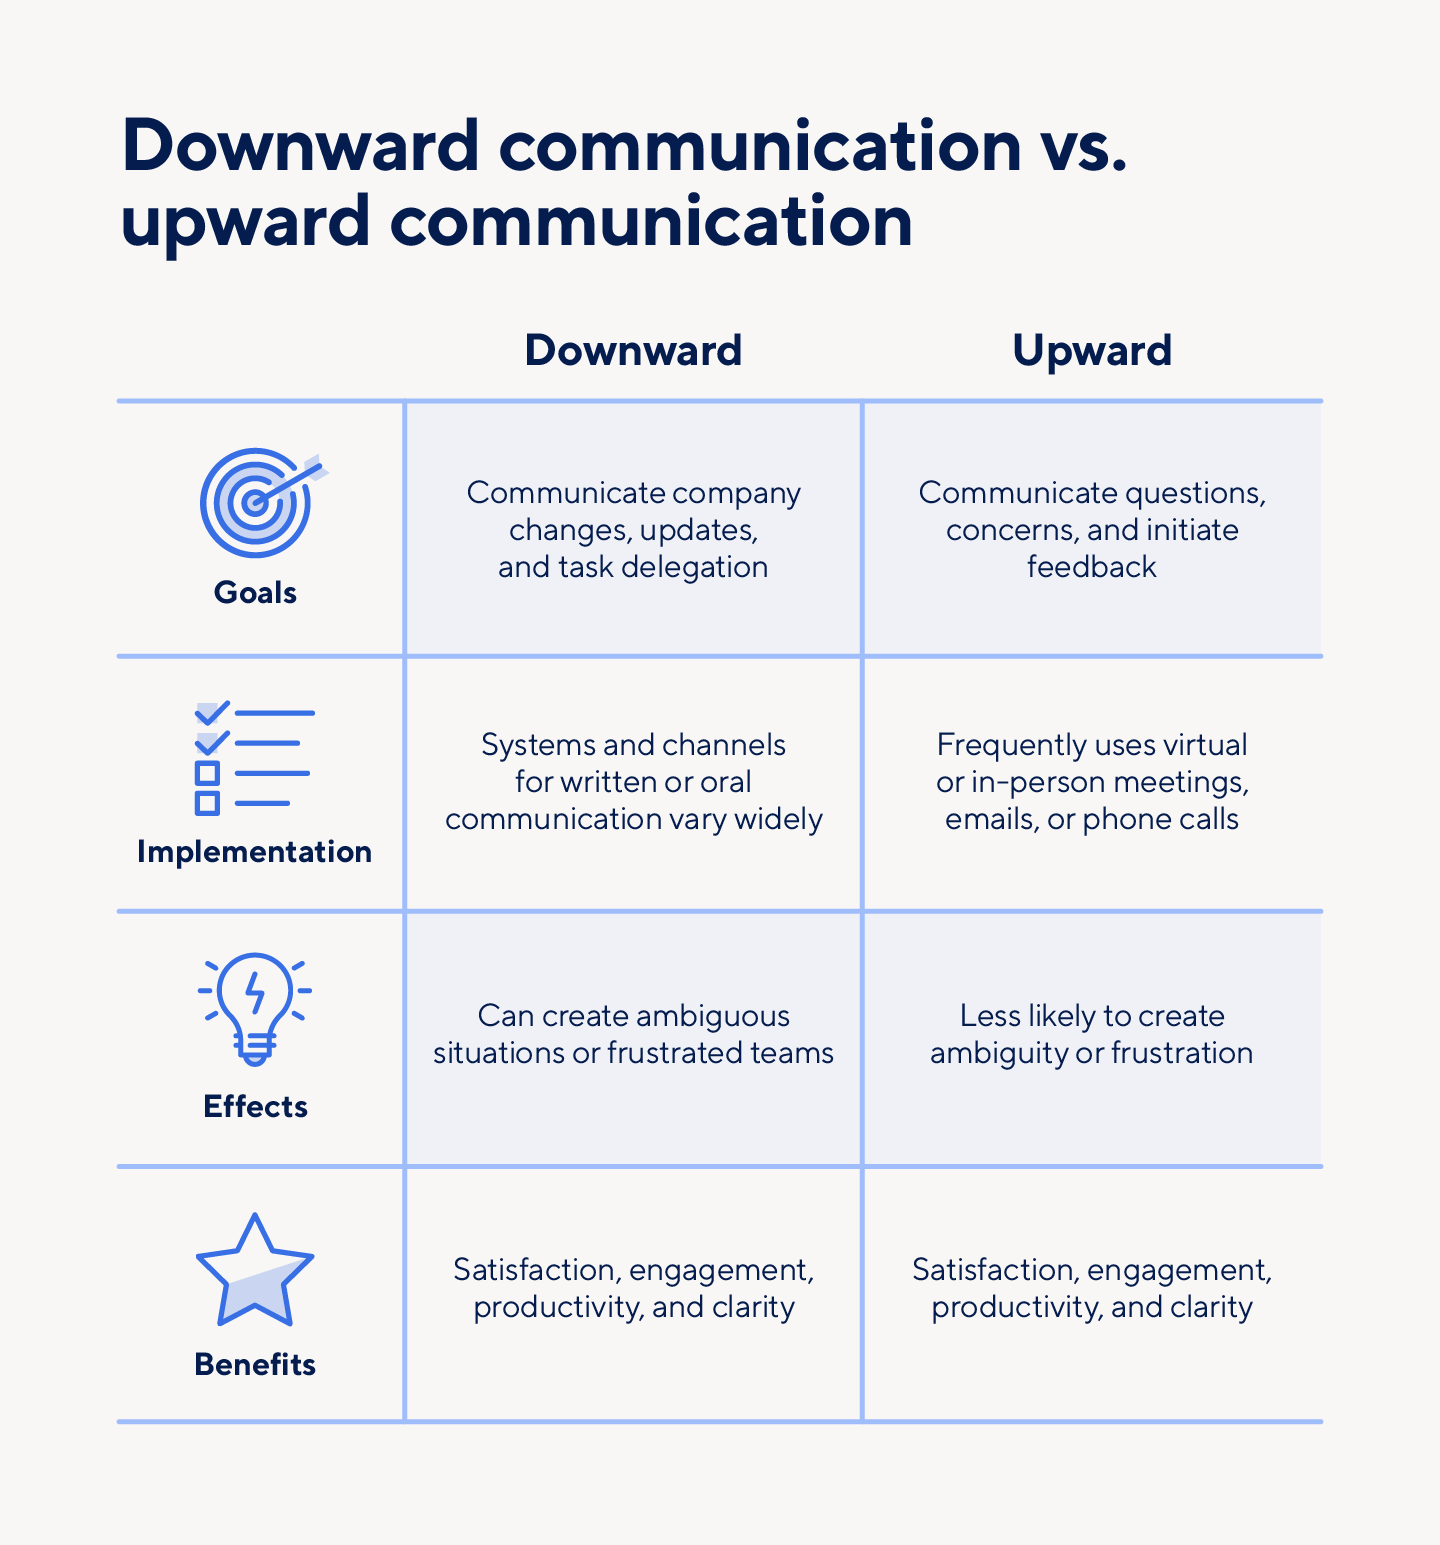 Goals, implementation, effects, and benefits are the main differences in downward communication vs upward communication.